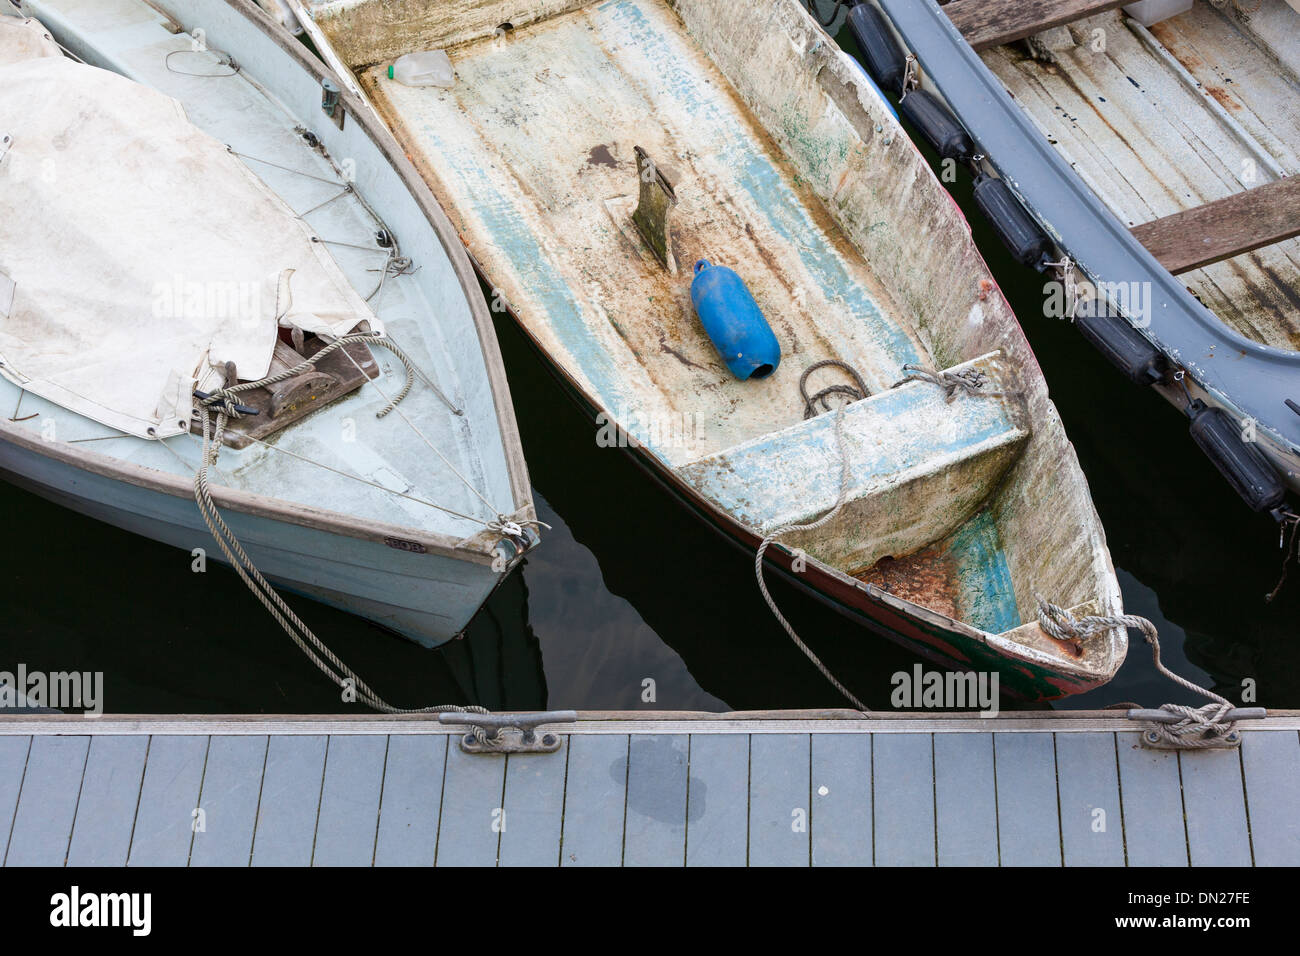 A line of old boats tied to a pontoon, viewed from above. Stock Photo